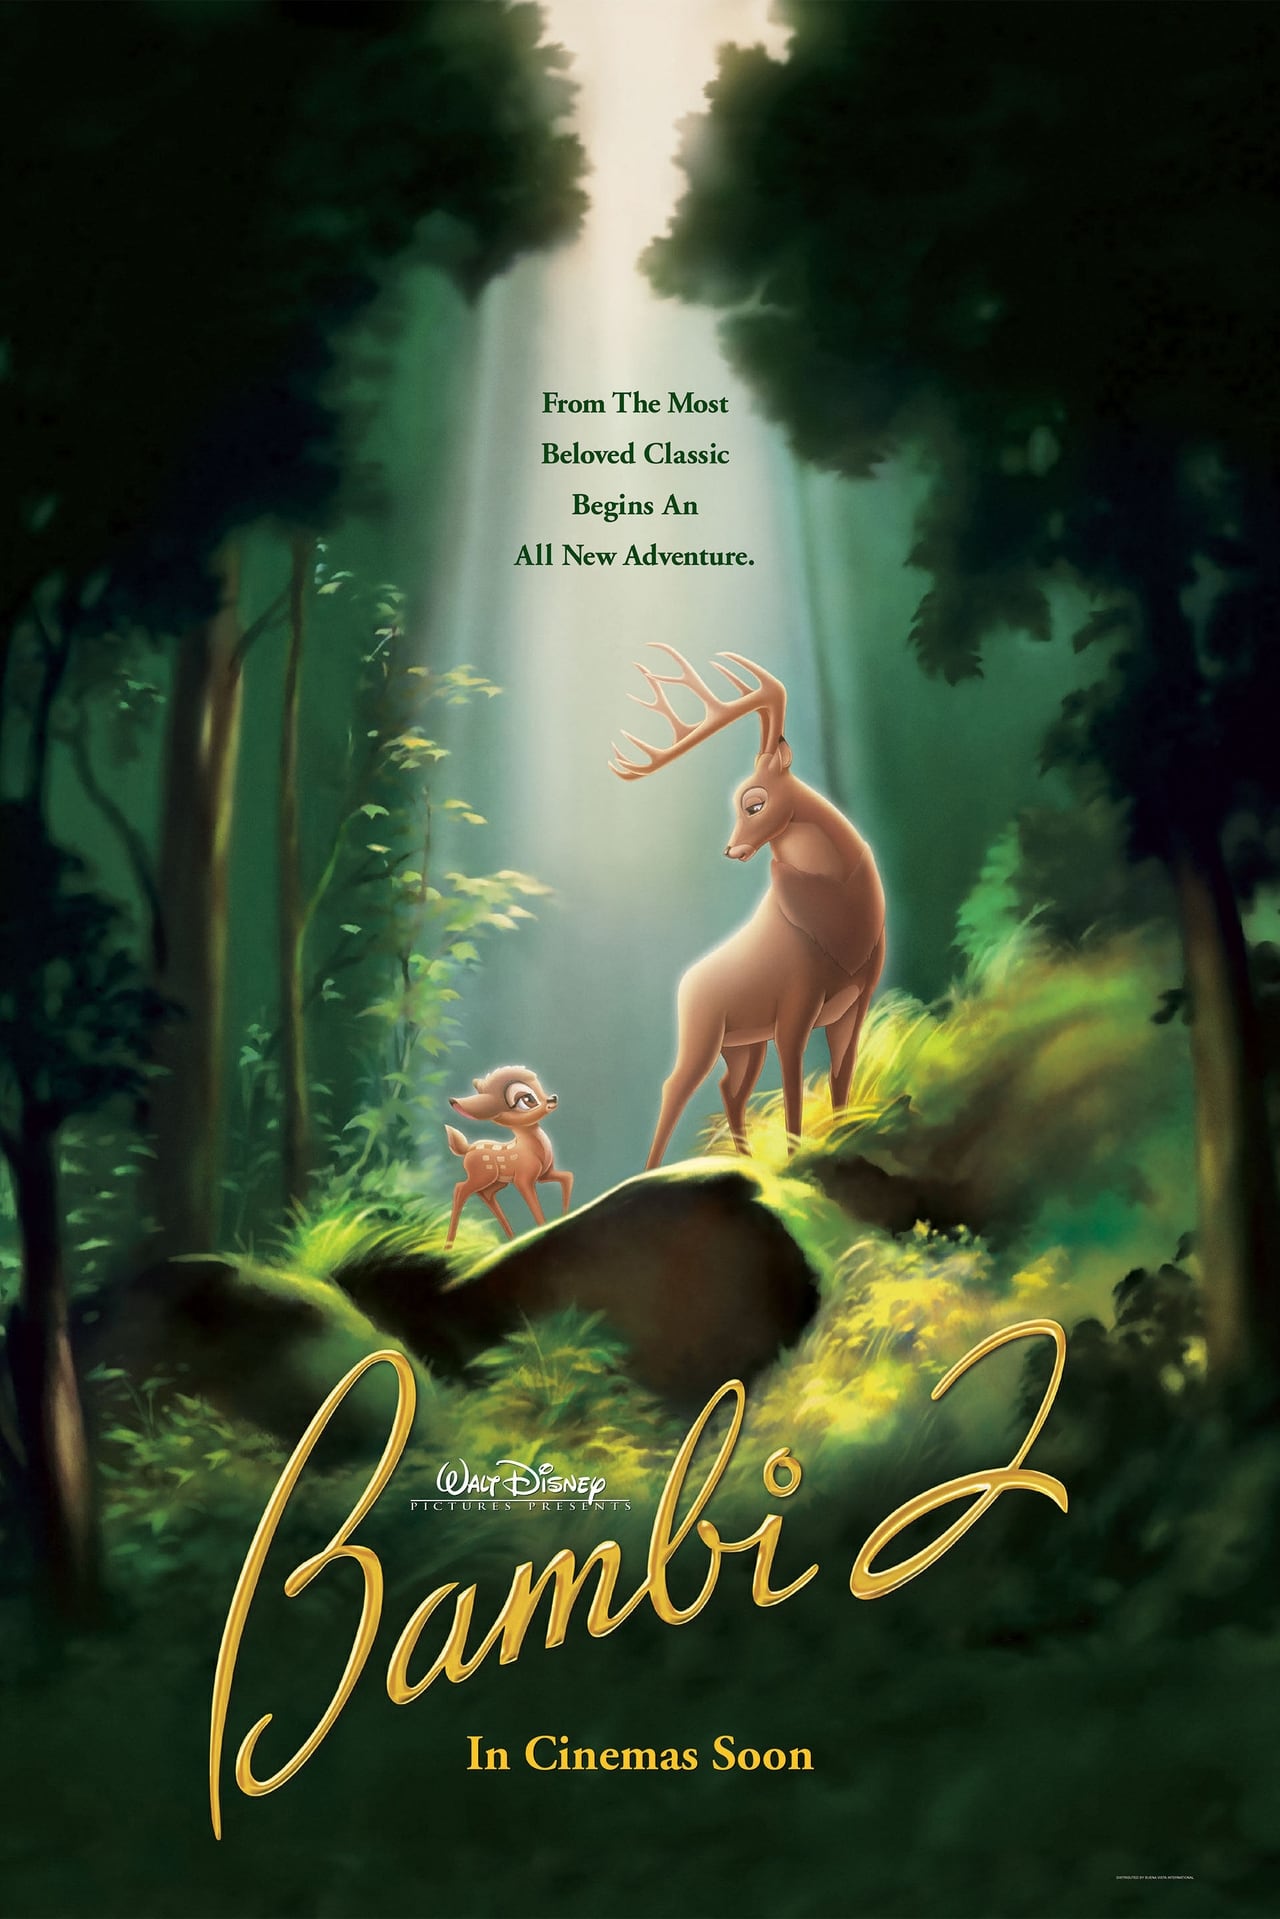 Bambi 2: The Great Prince of the Forest (2006) 256Kbps 23.976Fps 48Khz 5.1Ch Disney+ DD+ E-AC3 Turkish Audio TAC